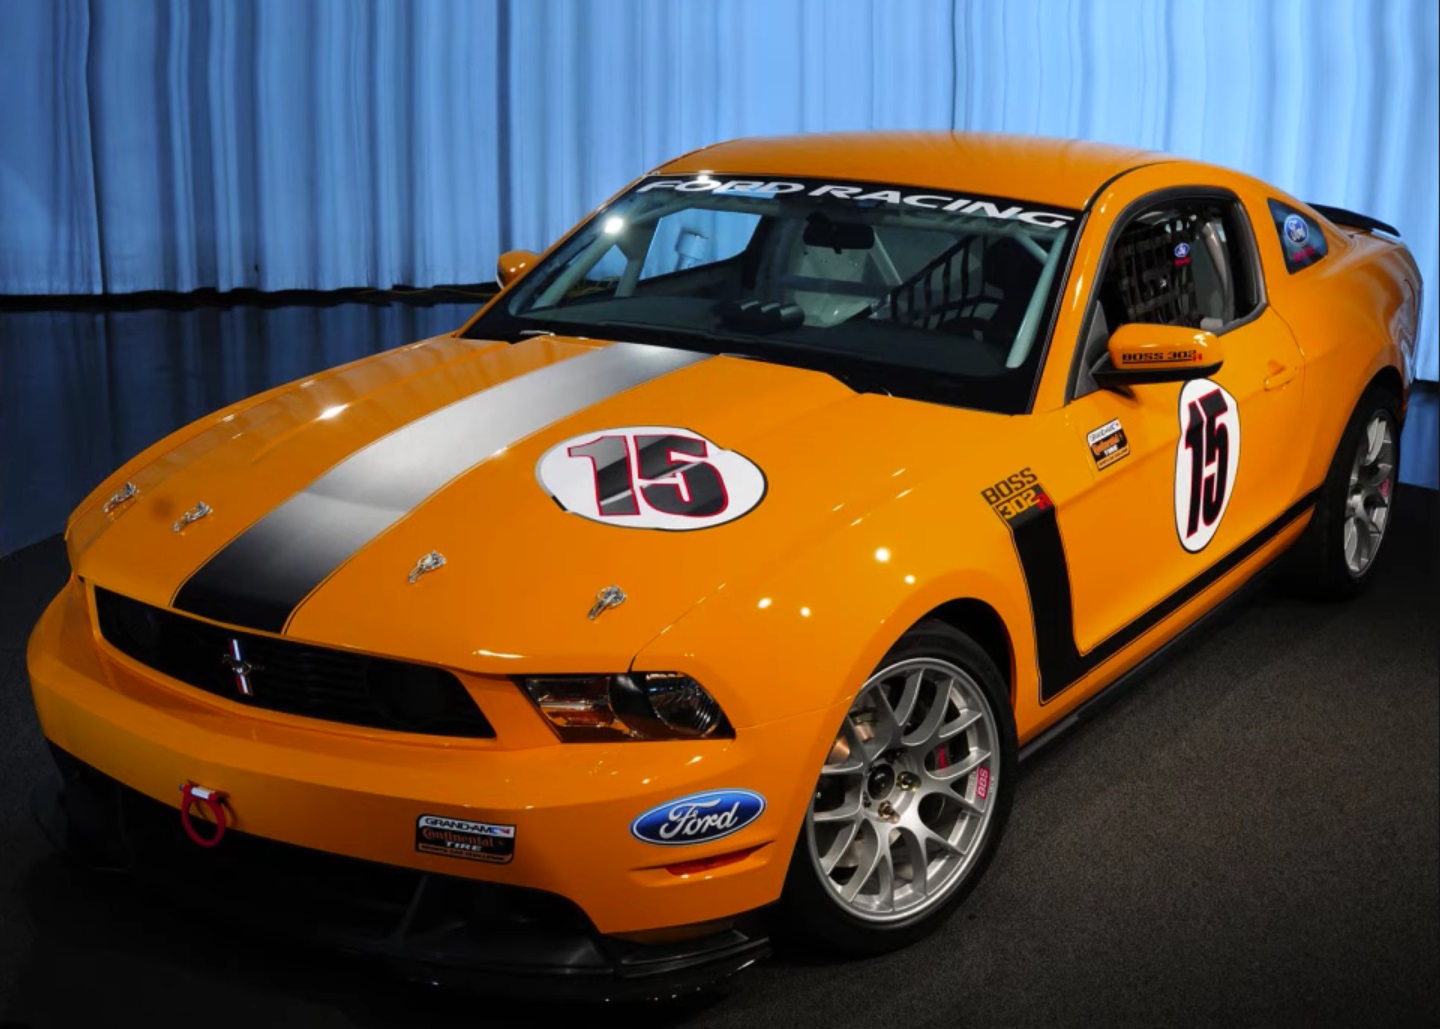 Video: Exclusive Look At The 2011 Ford Mustang Boss 302R